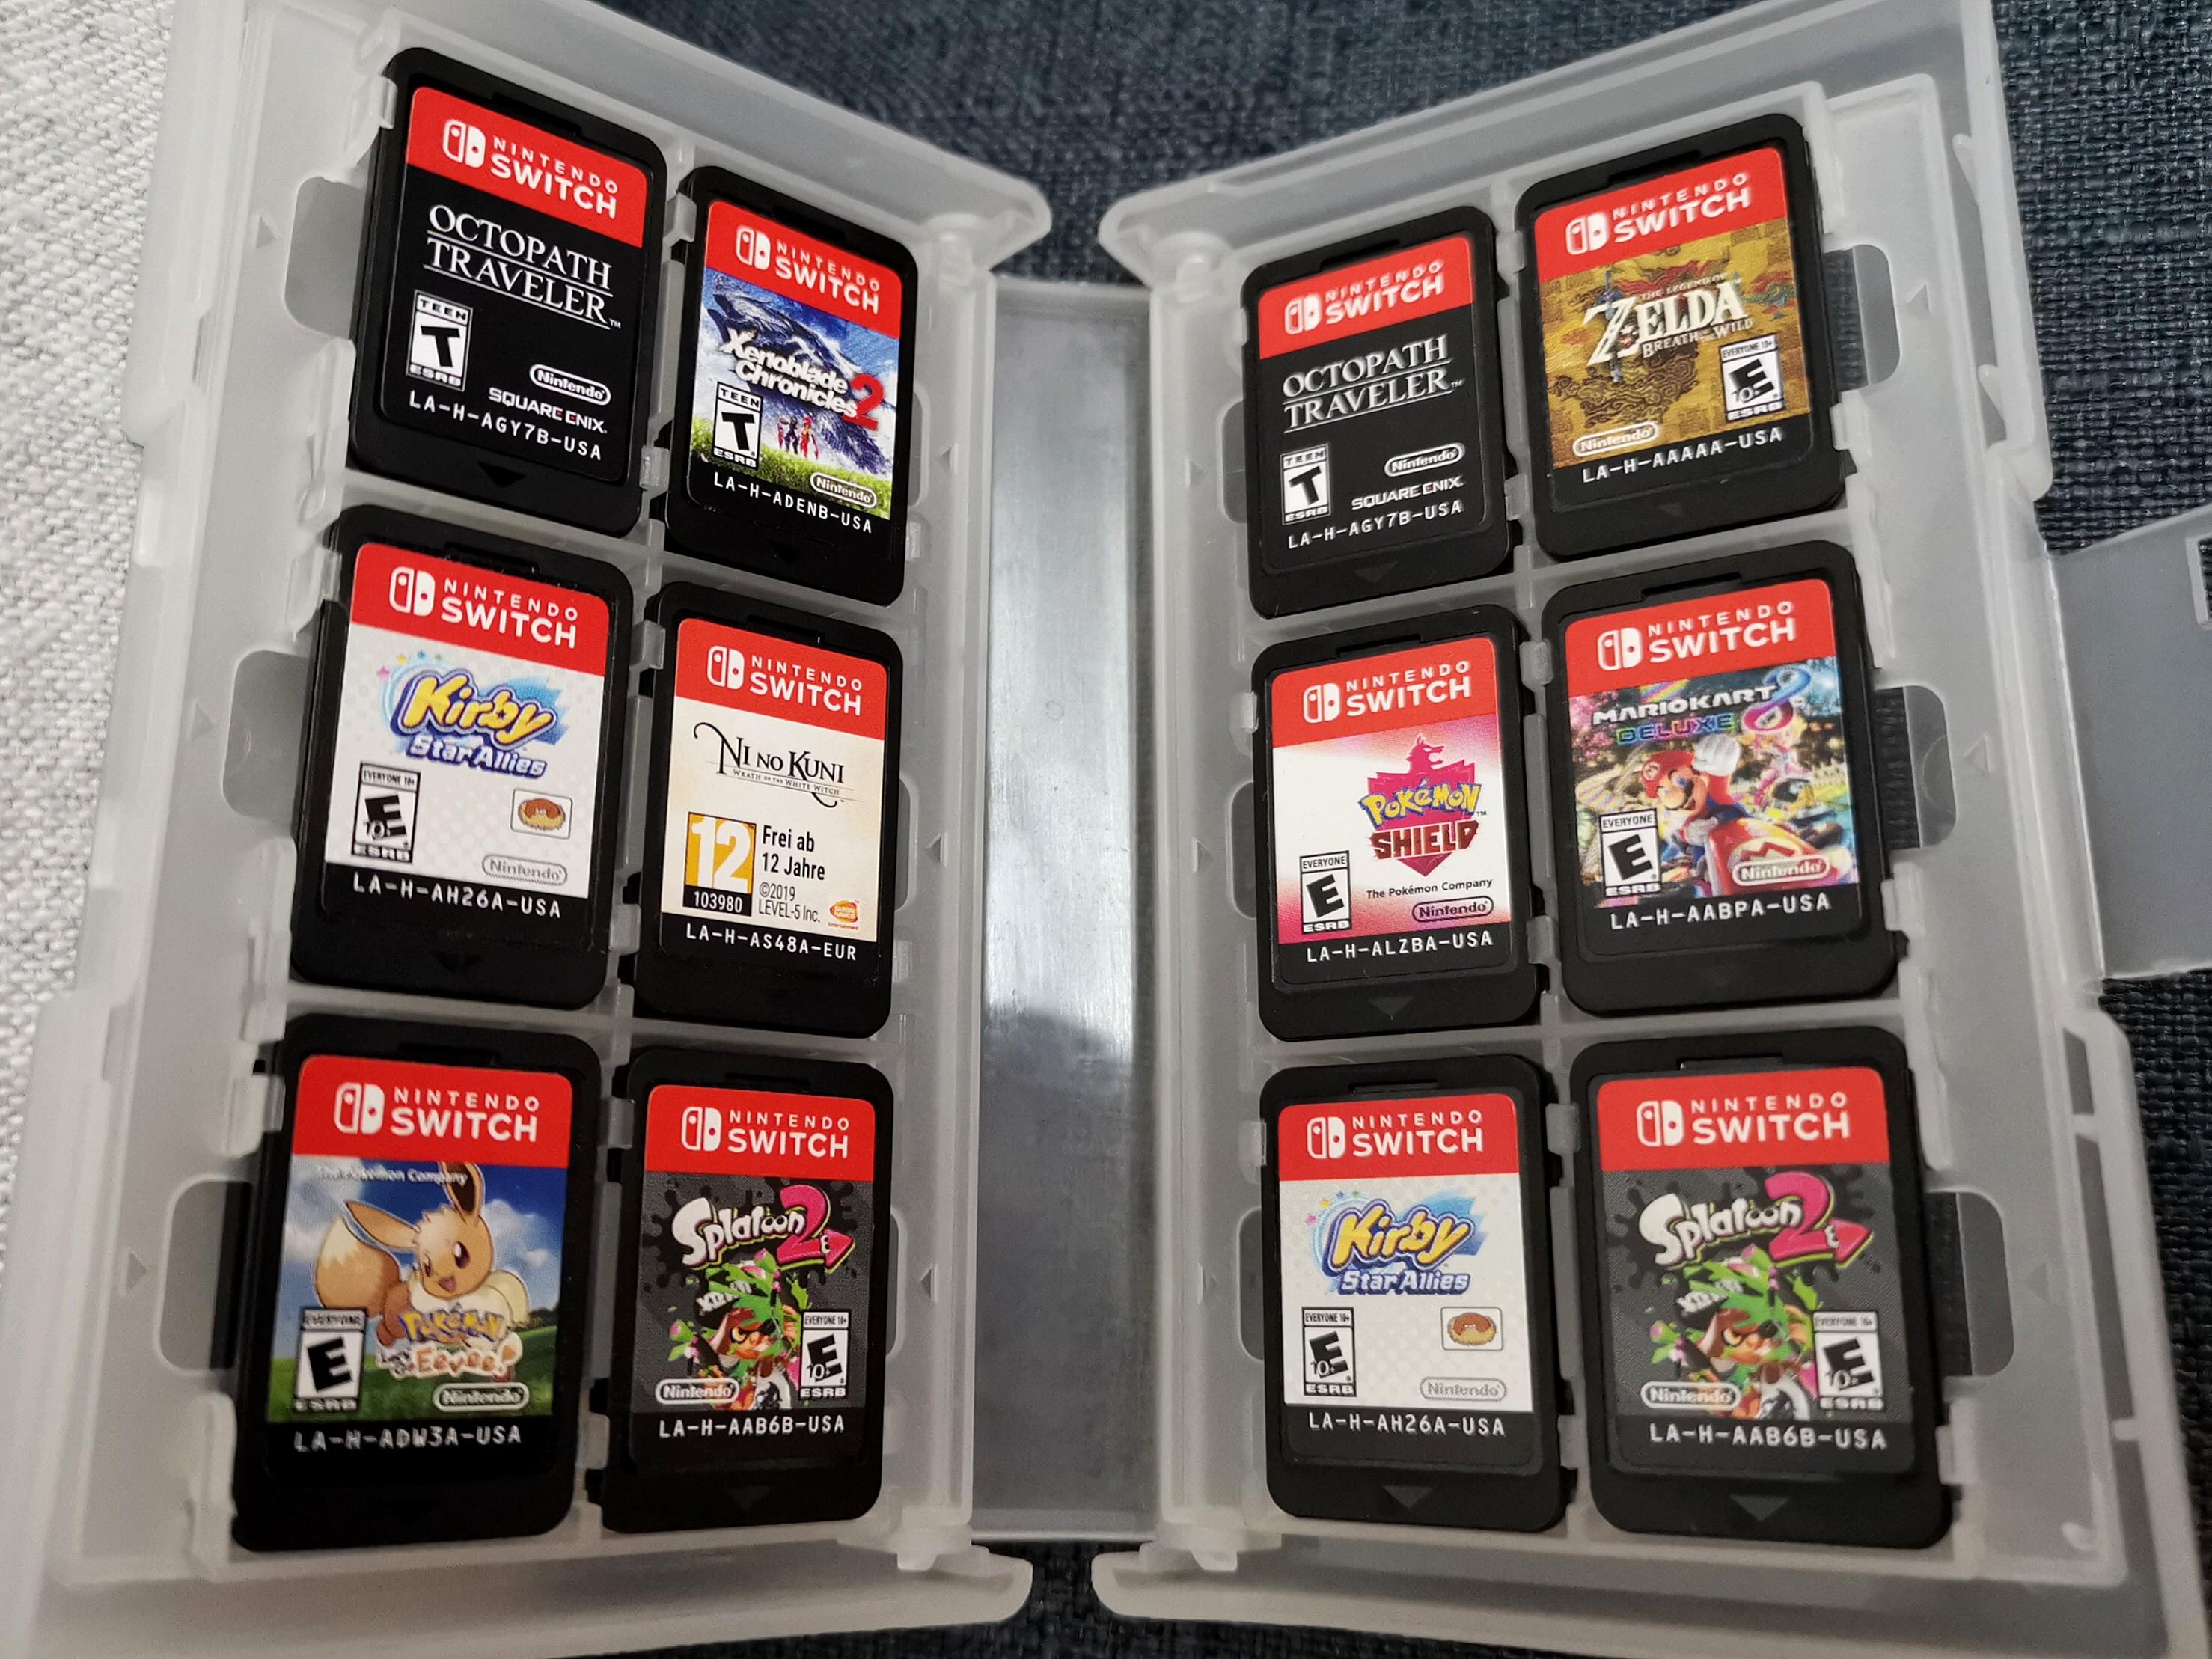 no nintendo switch in stock